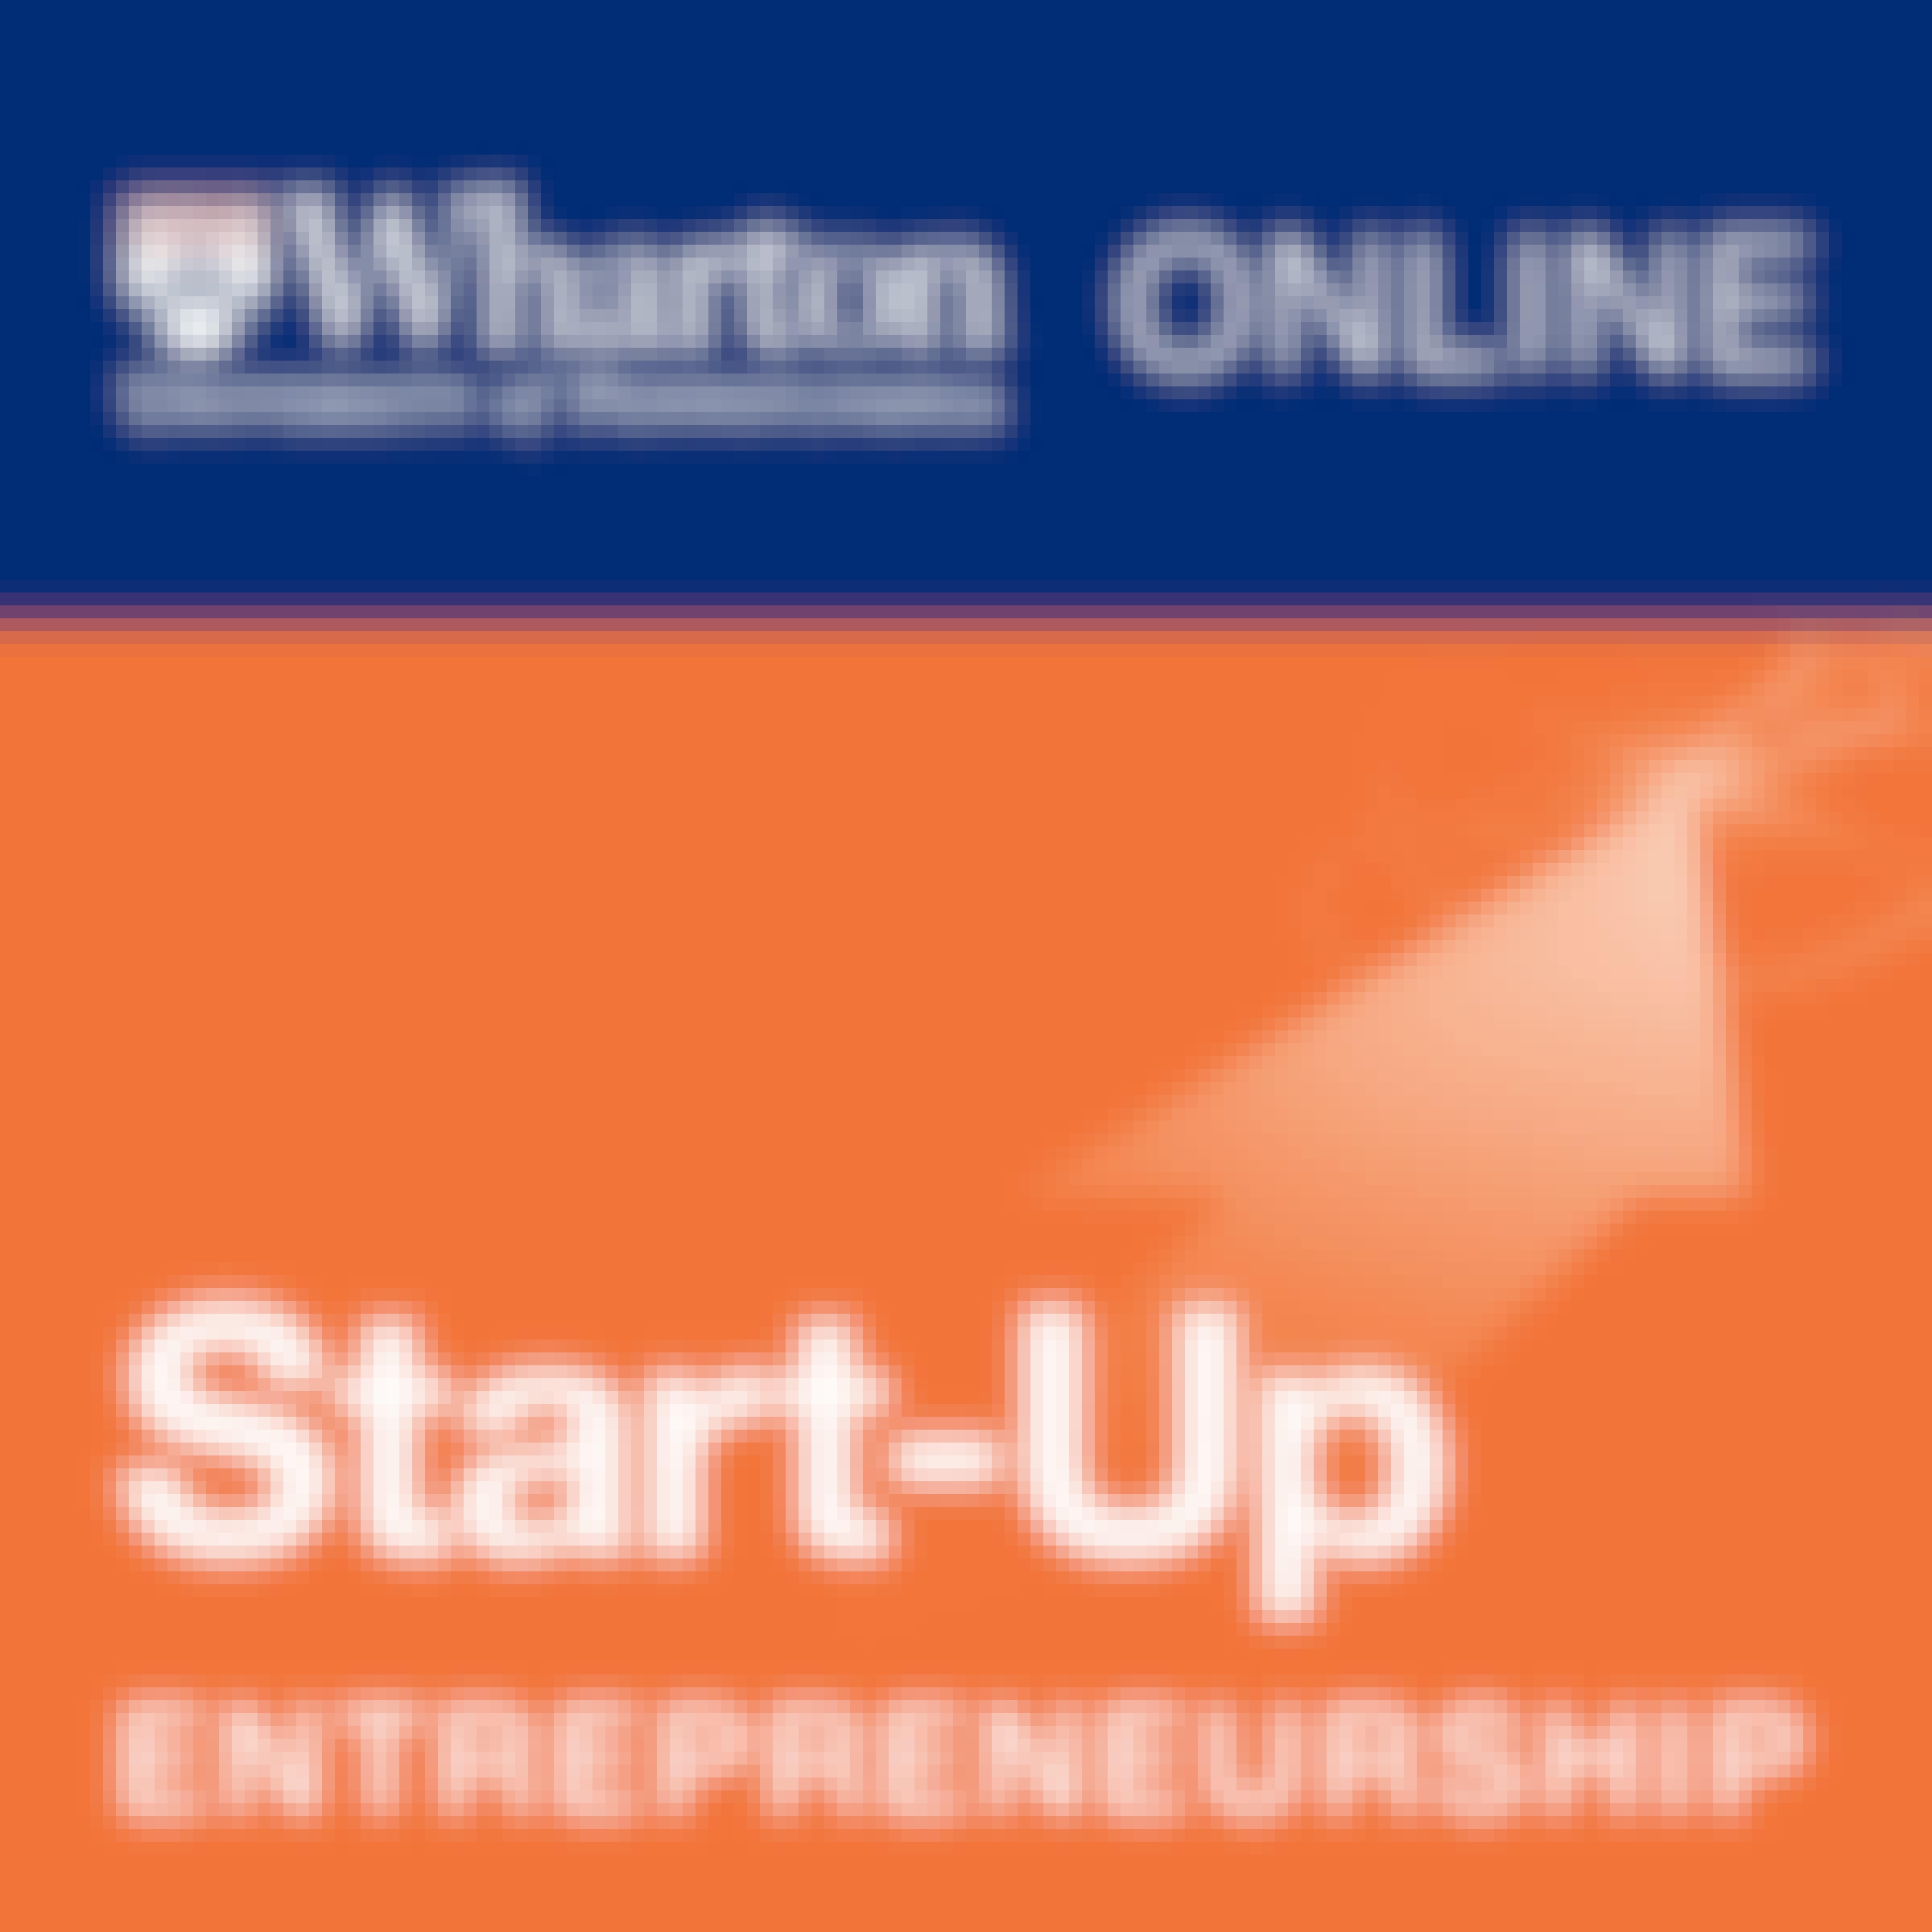 Course : [English for Business and Entrepreneurship] by Coursera